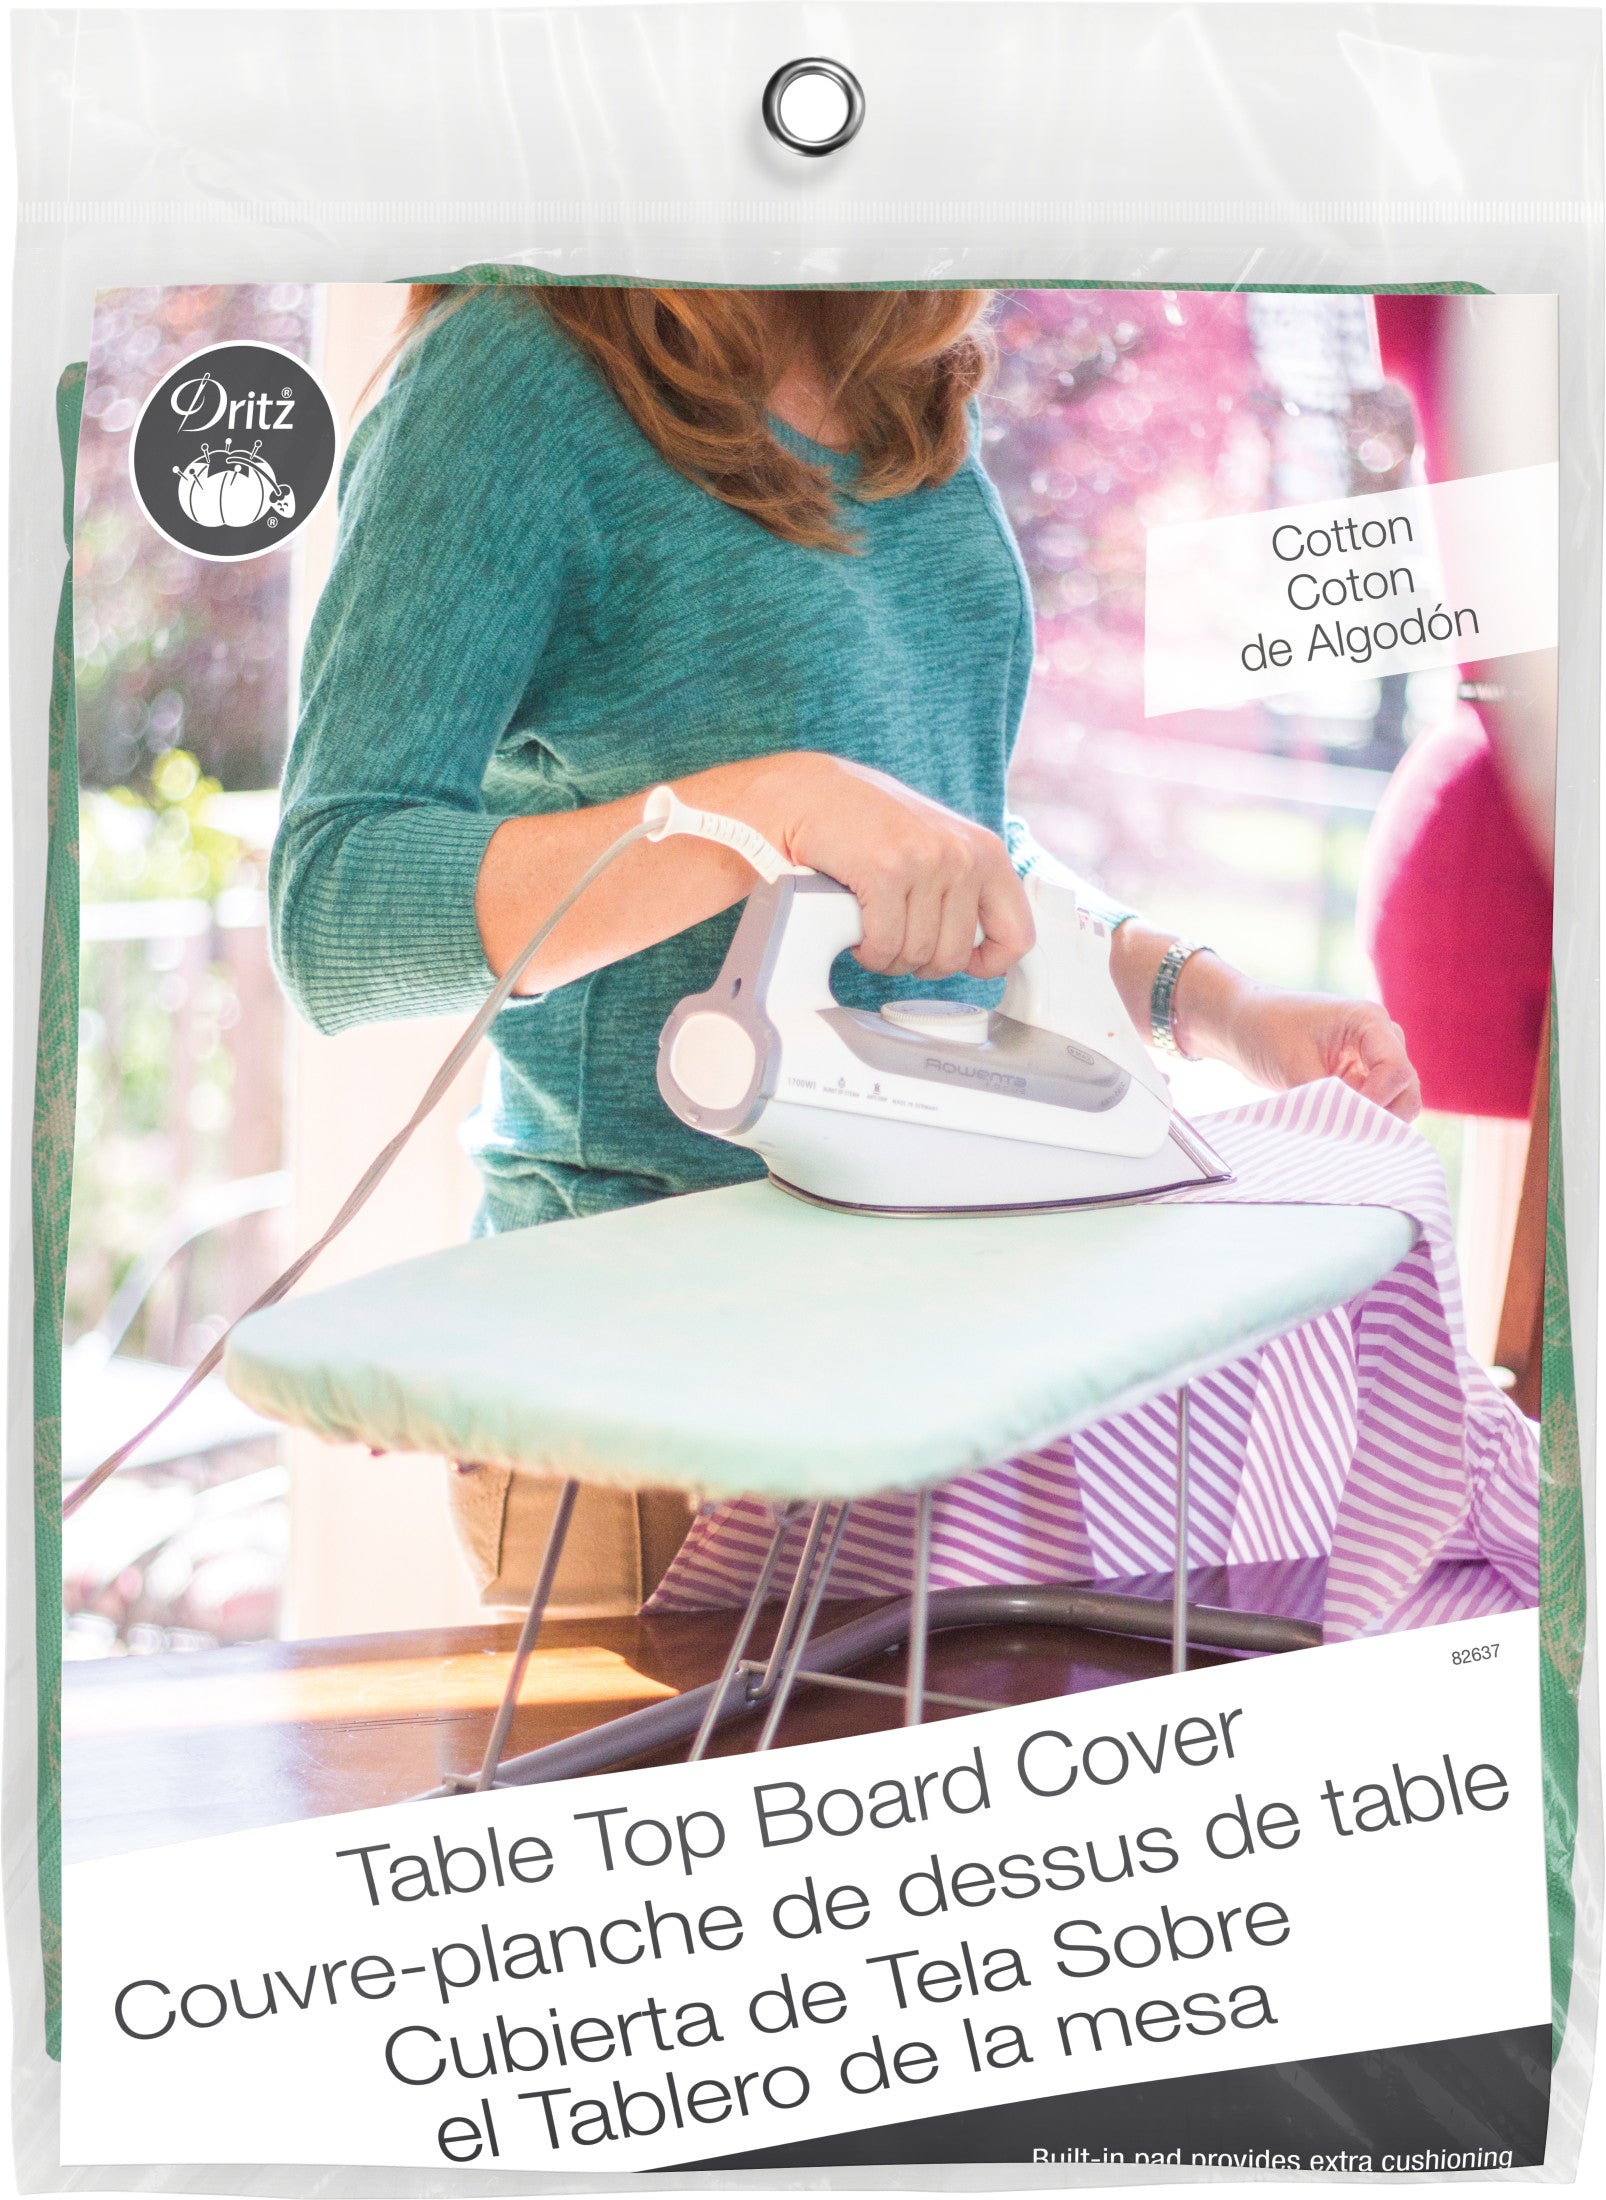 Dritz Cotton Table Top Ironing Board Cover